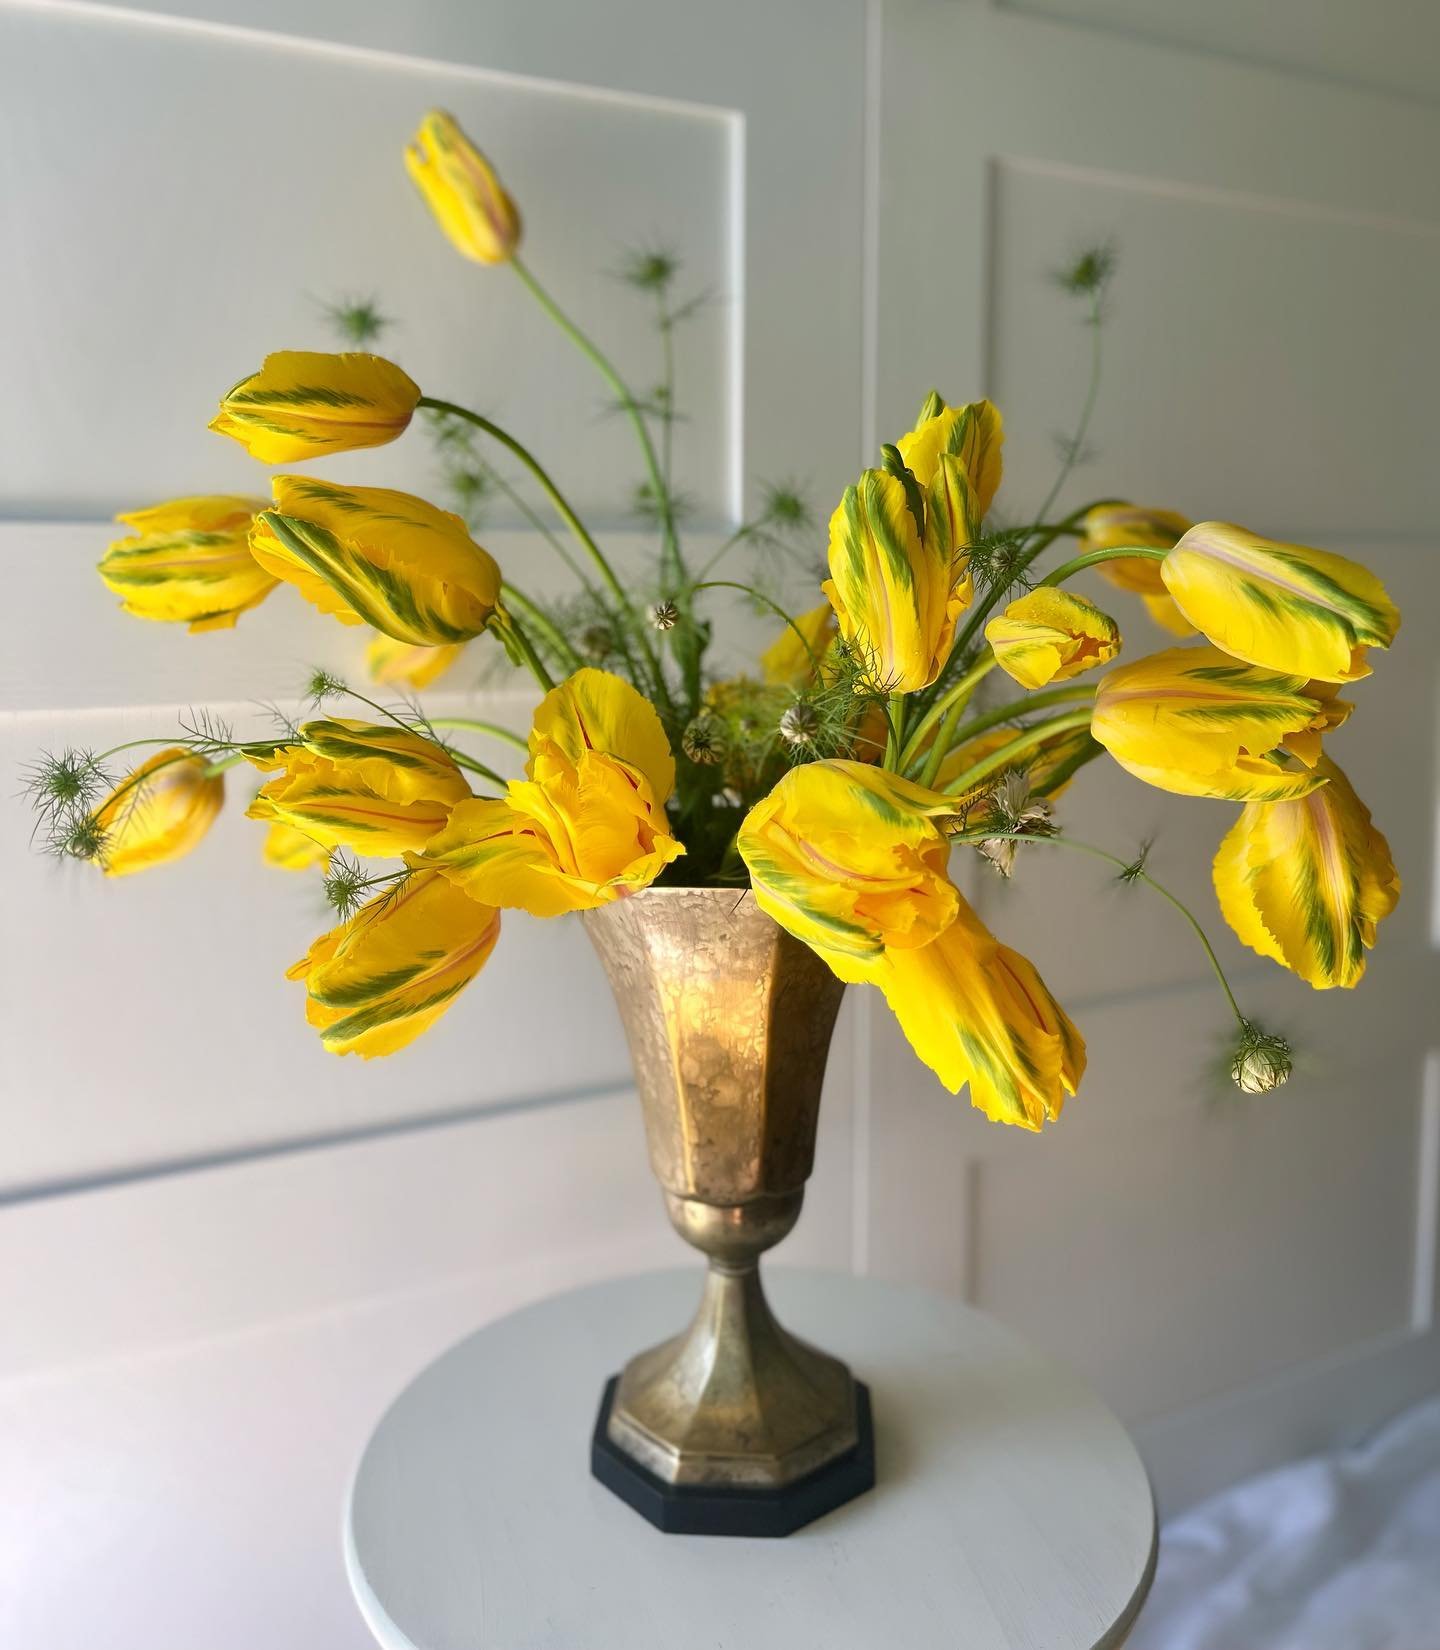 I&rsquo;m warming up to these vibrant 𝑃𝑎𝑟𝑟𝑜𝑡 𝑇𝑢𝑙𝑖𝑝𝑠 with a touch of 𝐿𝑜𝑣𝑒 𝑖𝑛 𝑎 𝑀𝑖𝑠𝑡🌿 
It&rsquo;s good to get out of your comfort zone💛

#floraldesign 
#flowersarebeautiful 
#flowersaregoodforthesoul 
#floralarrangement